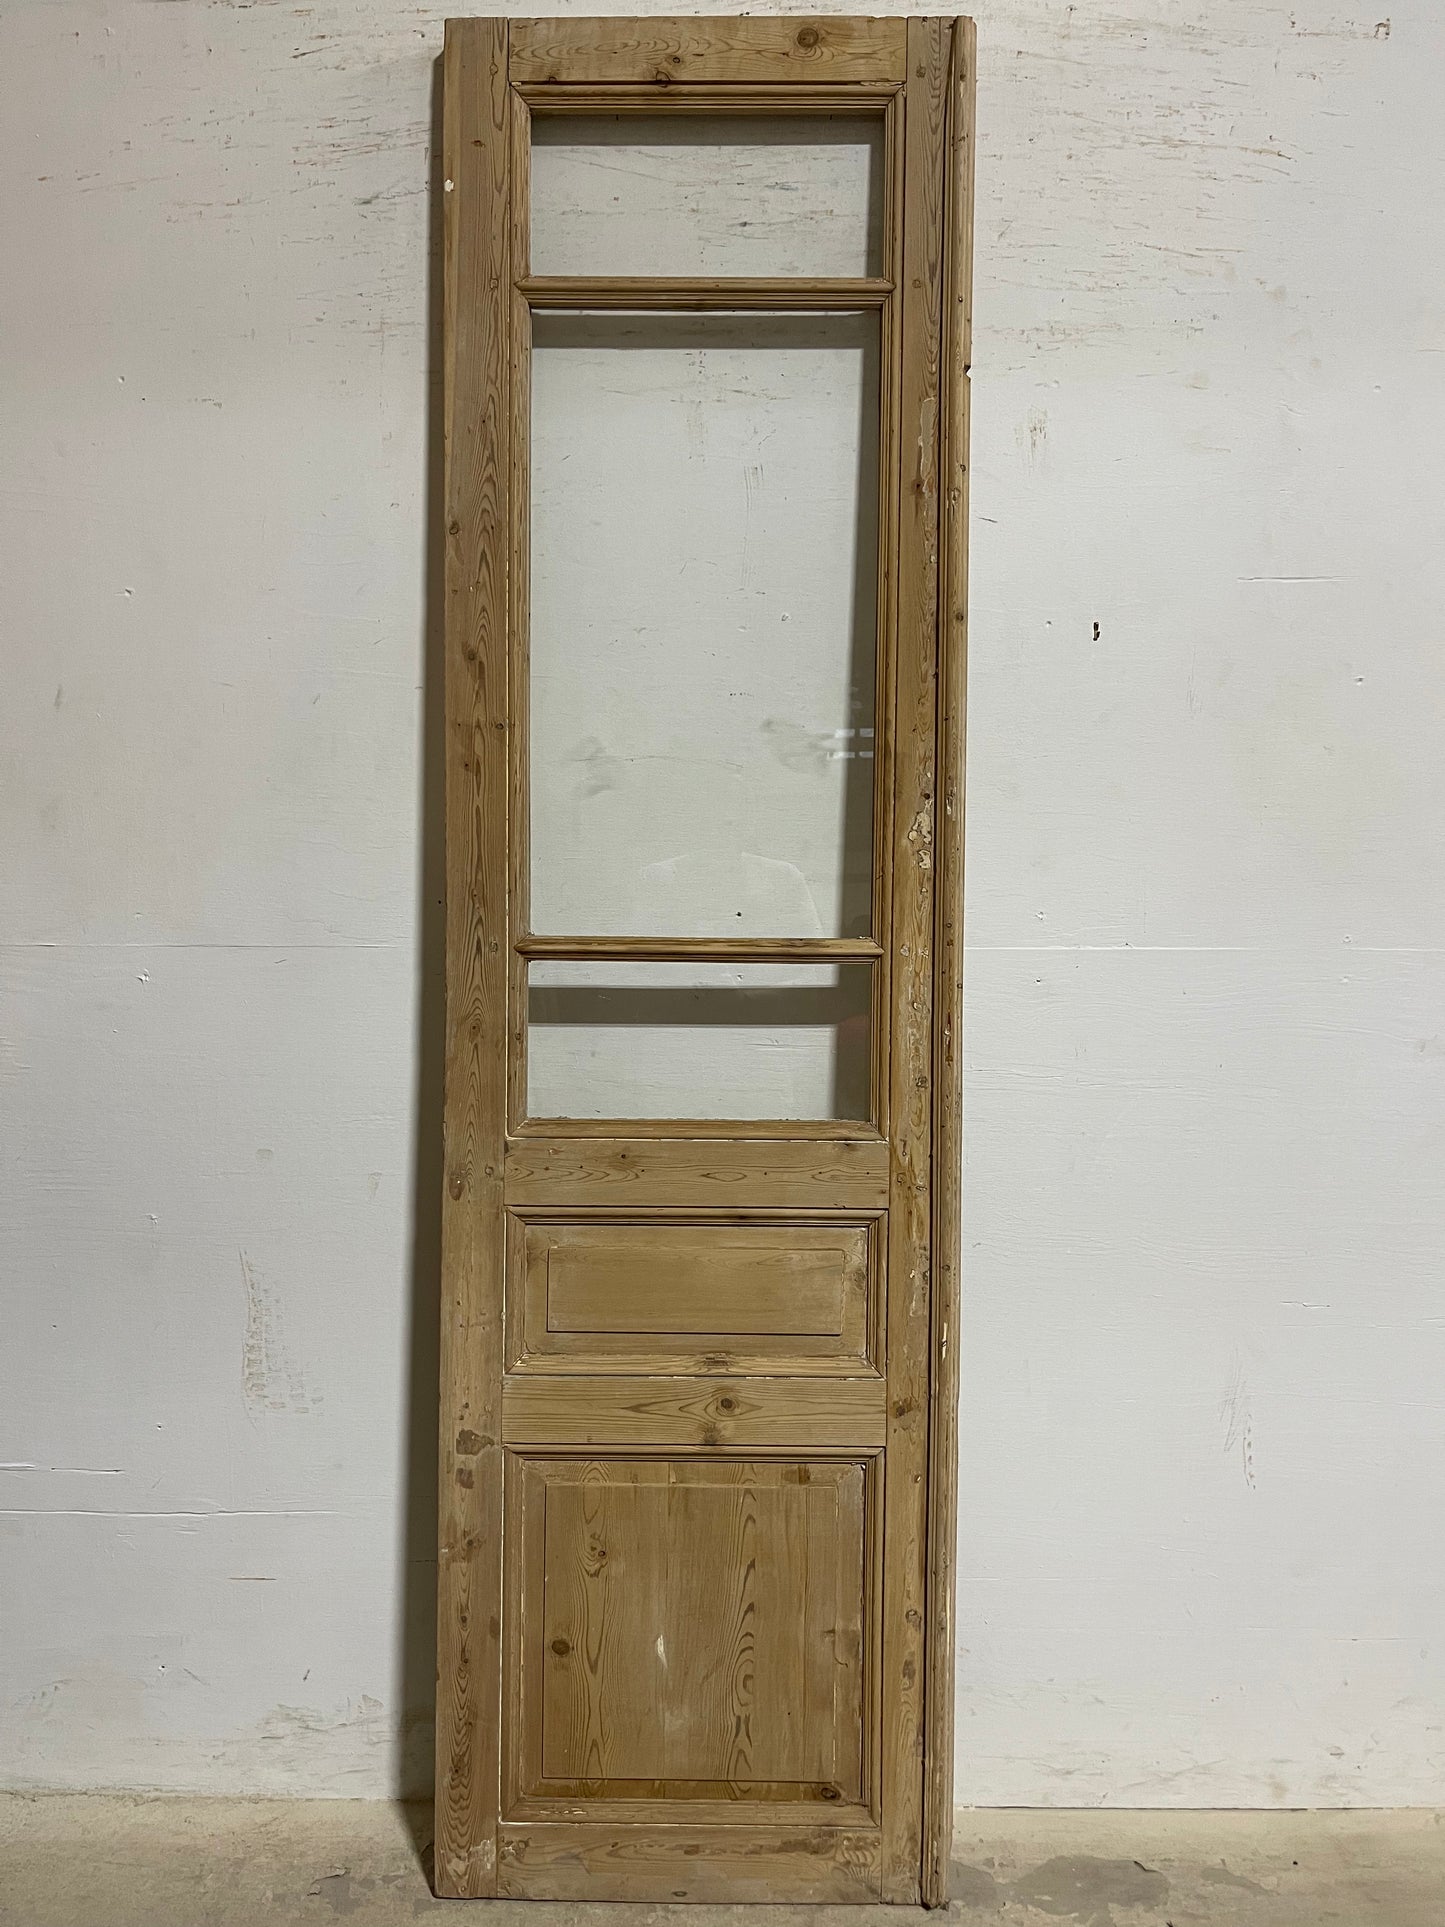 Antique  French Panel Door with Glass  (93.75x26.25) K311